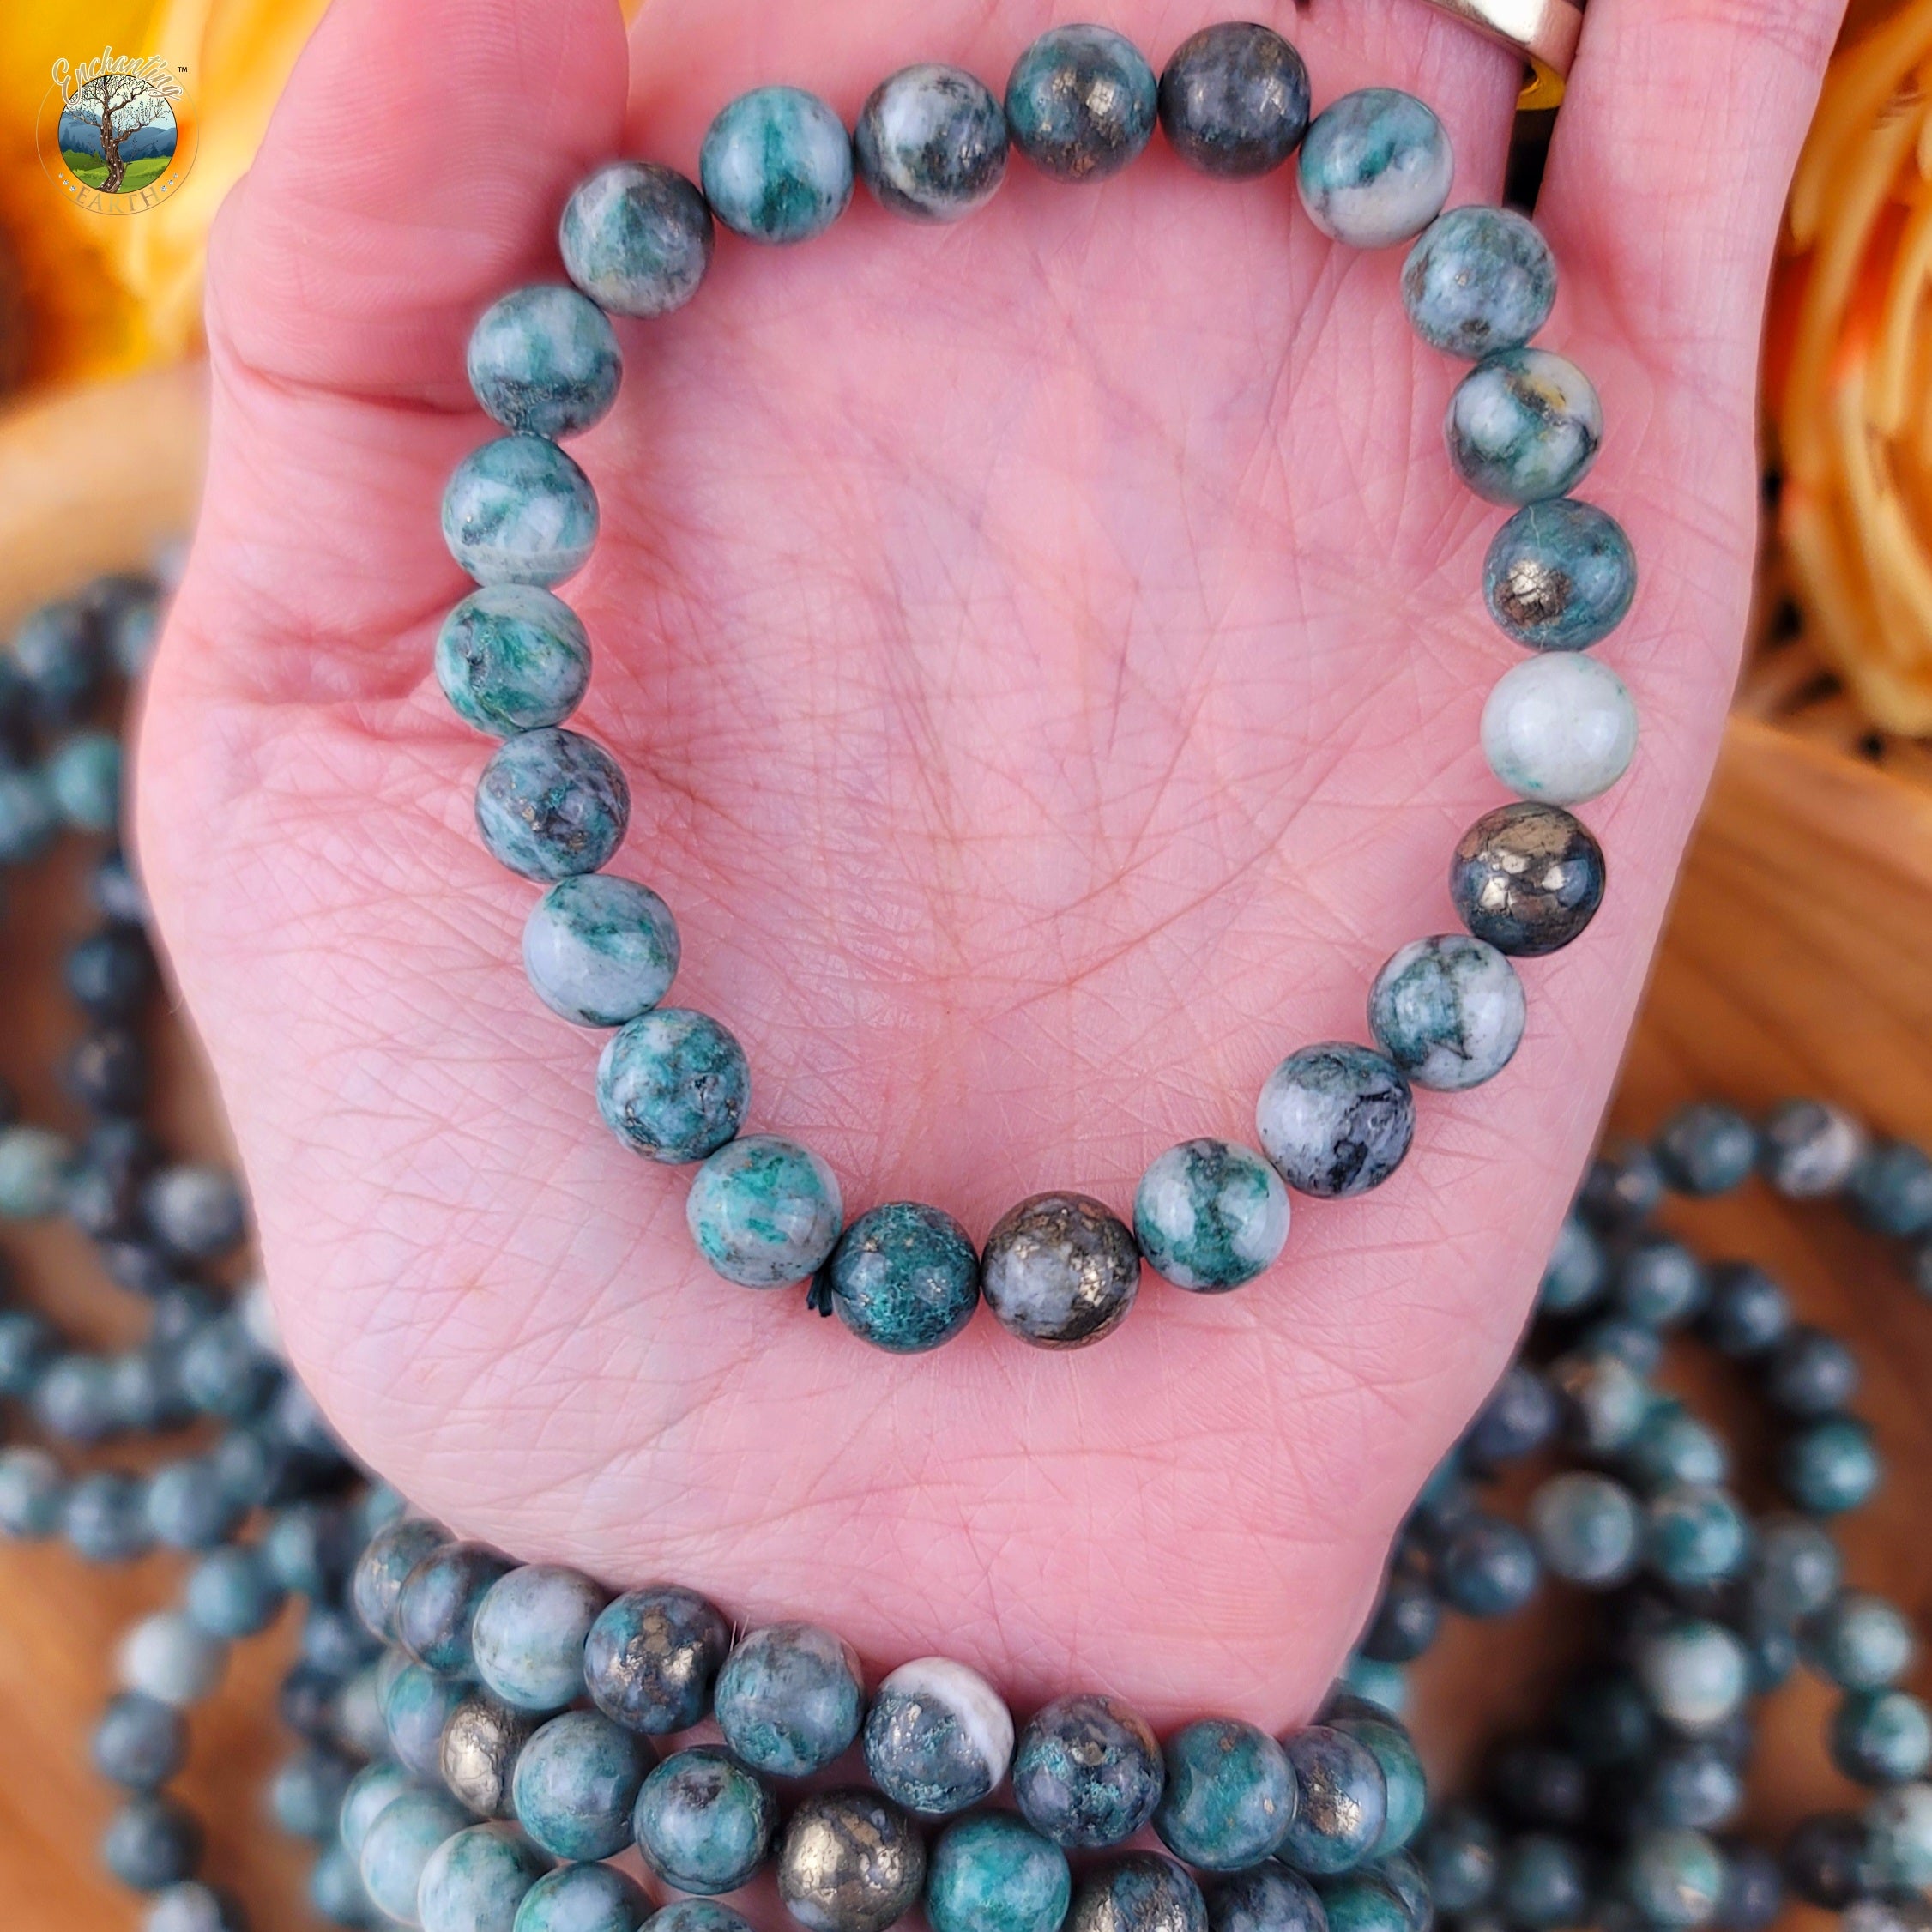 Pyrite in Jade Bracelet for Abundance, Good Luck and Protection